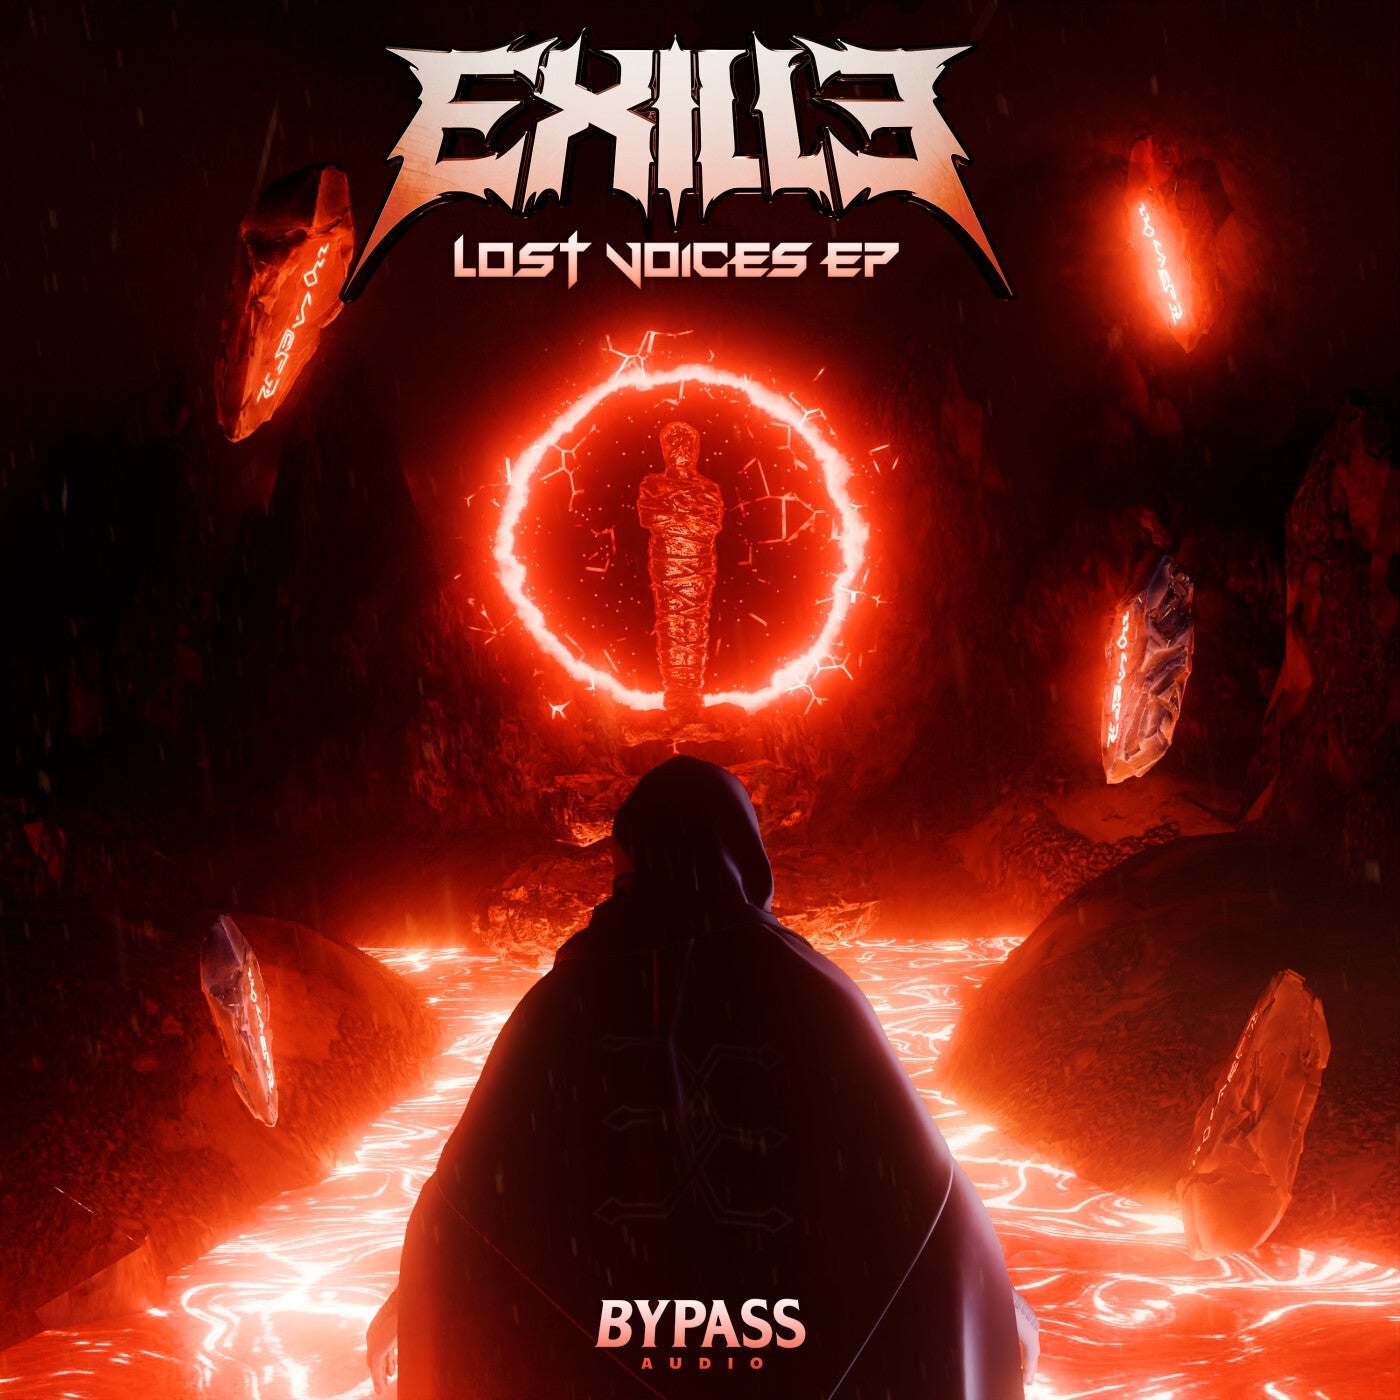 Lost Voices EP